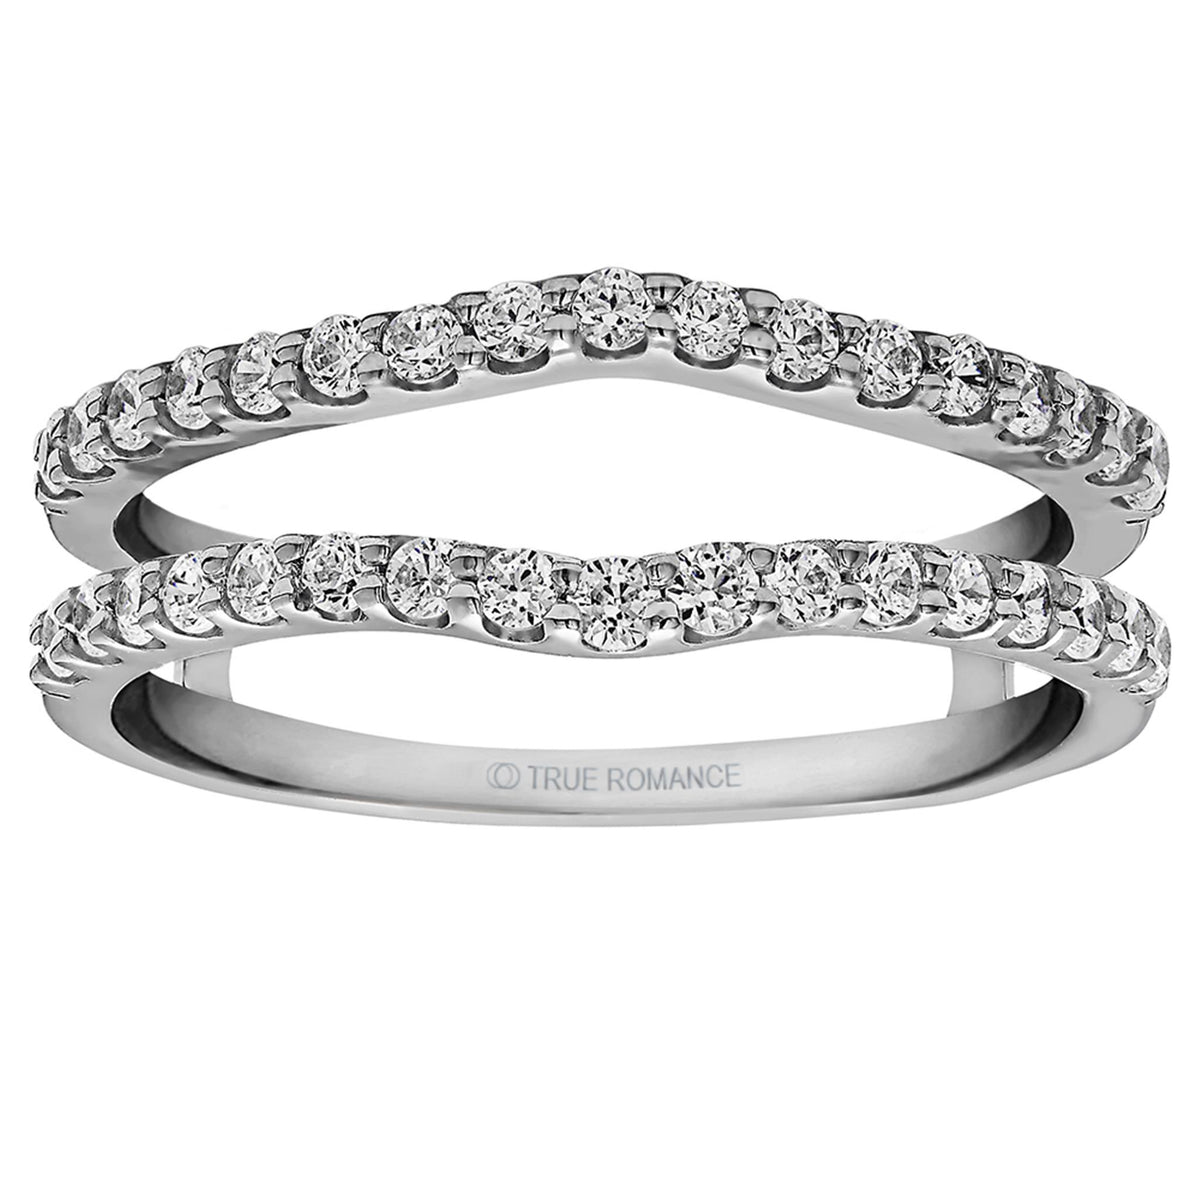 14Kt White Gold Insert Guard / Wrap Ring With 0.51cttw Natural Diamonds